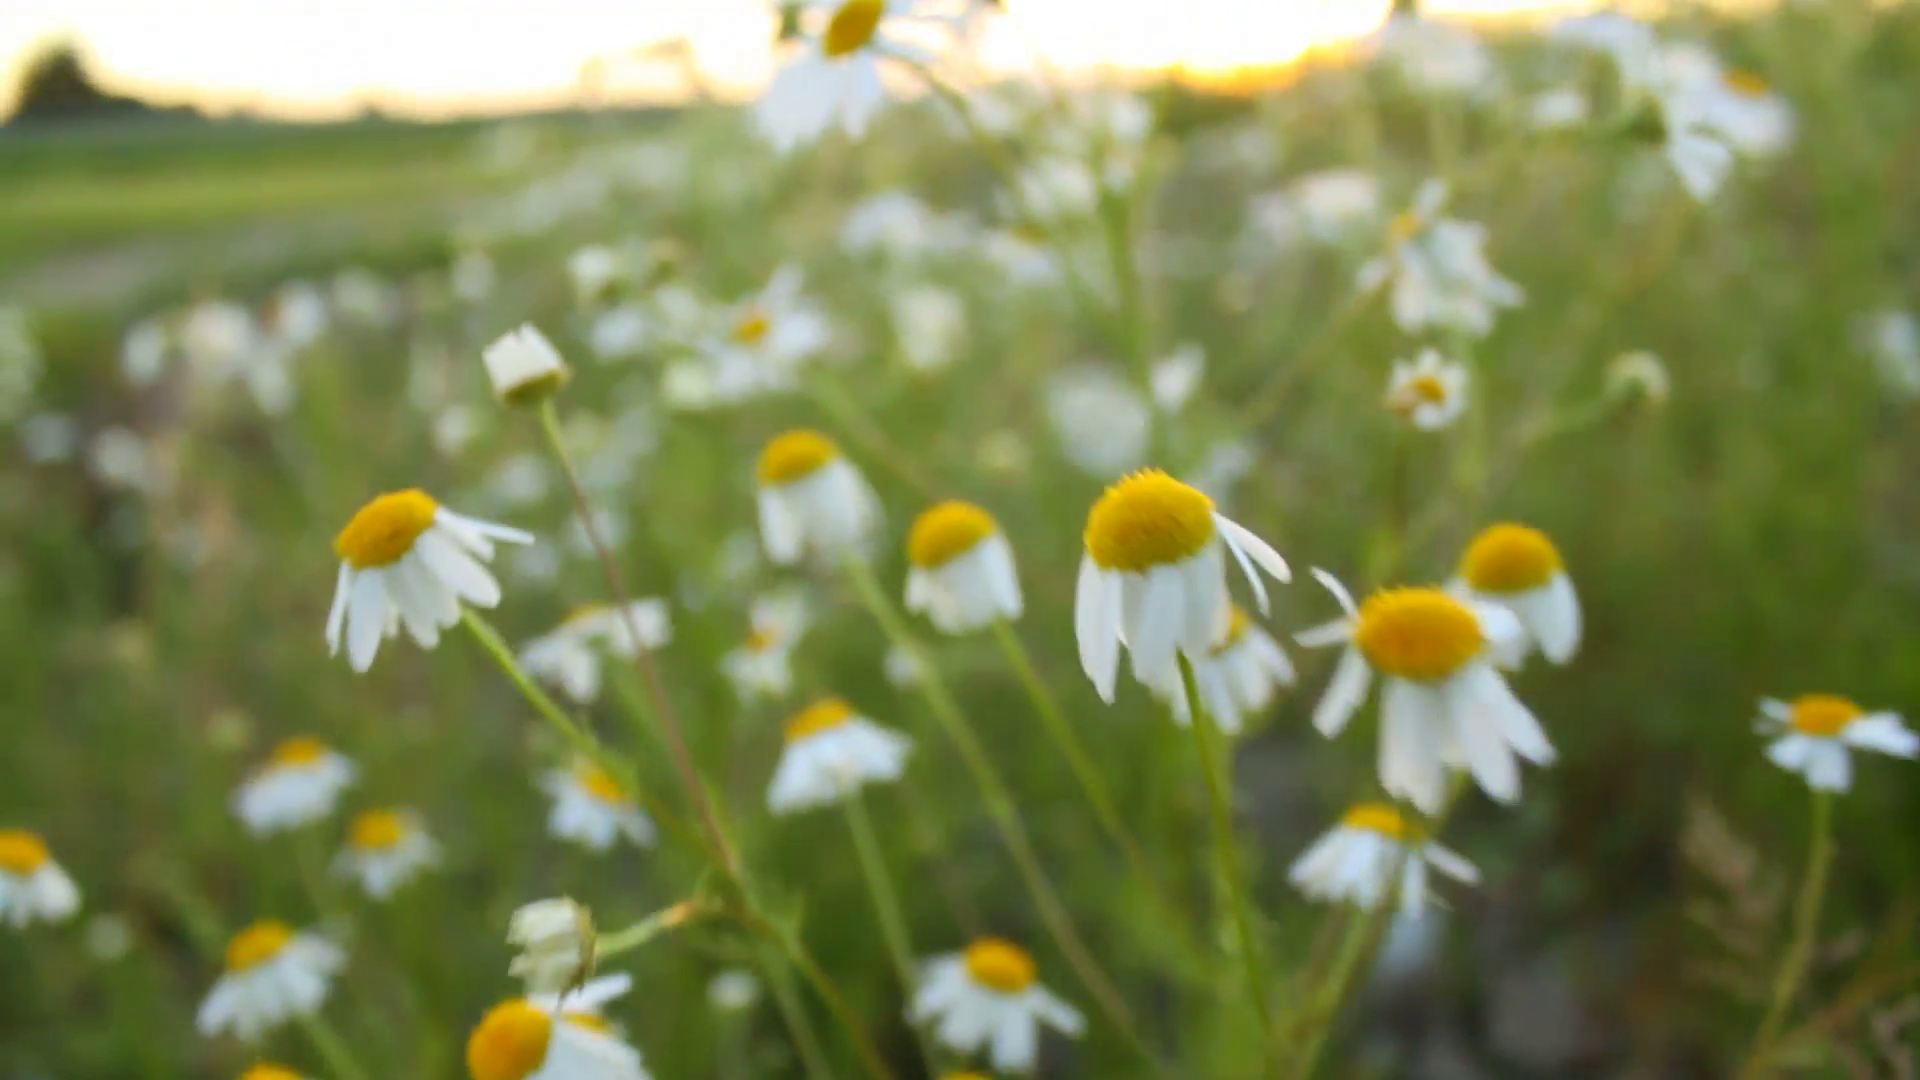 Walking through the field of white daisy flowers after sunset in the ...